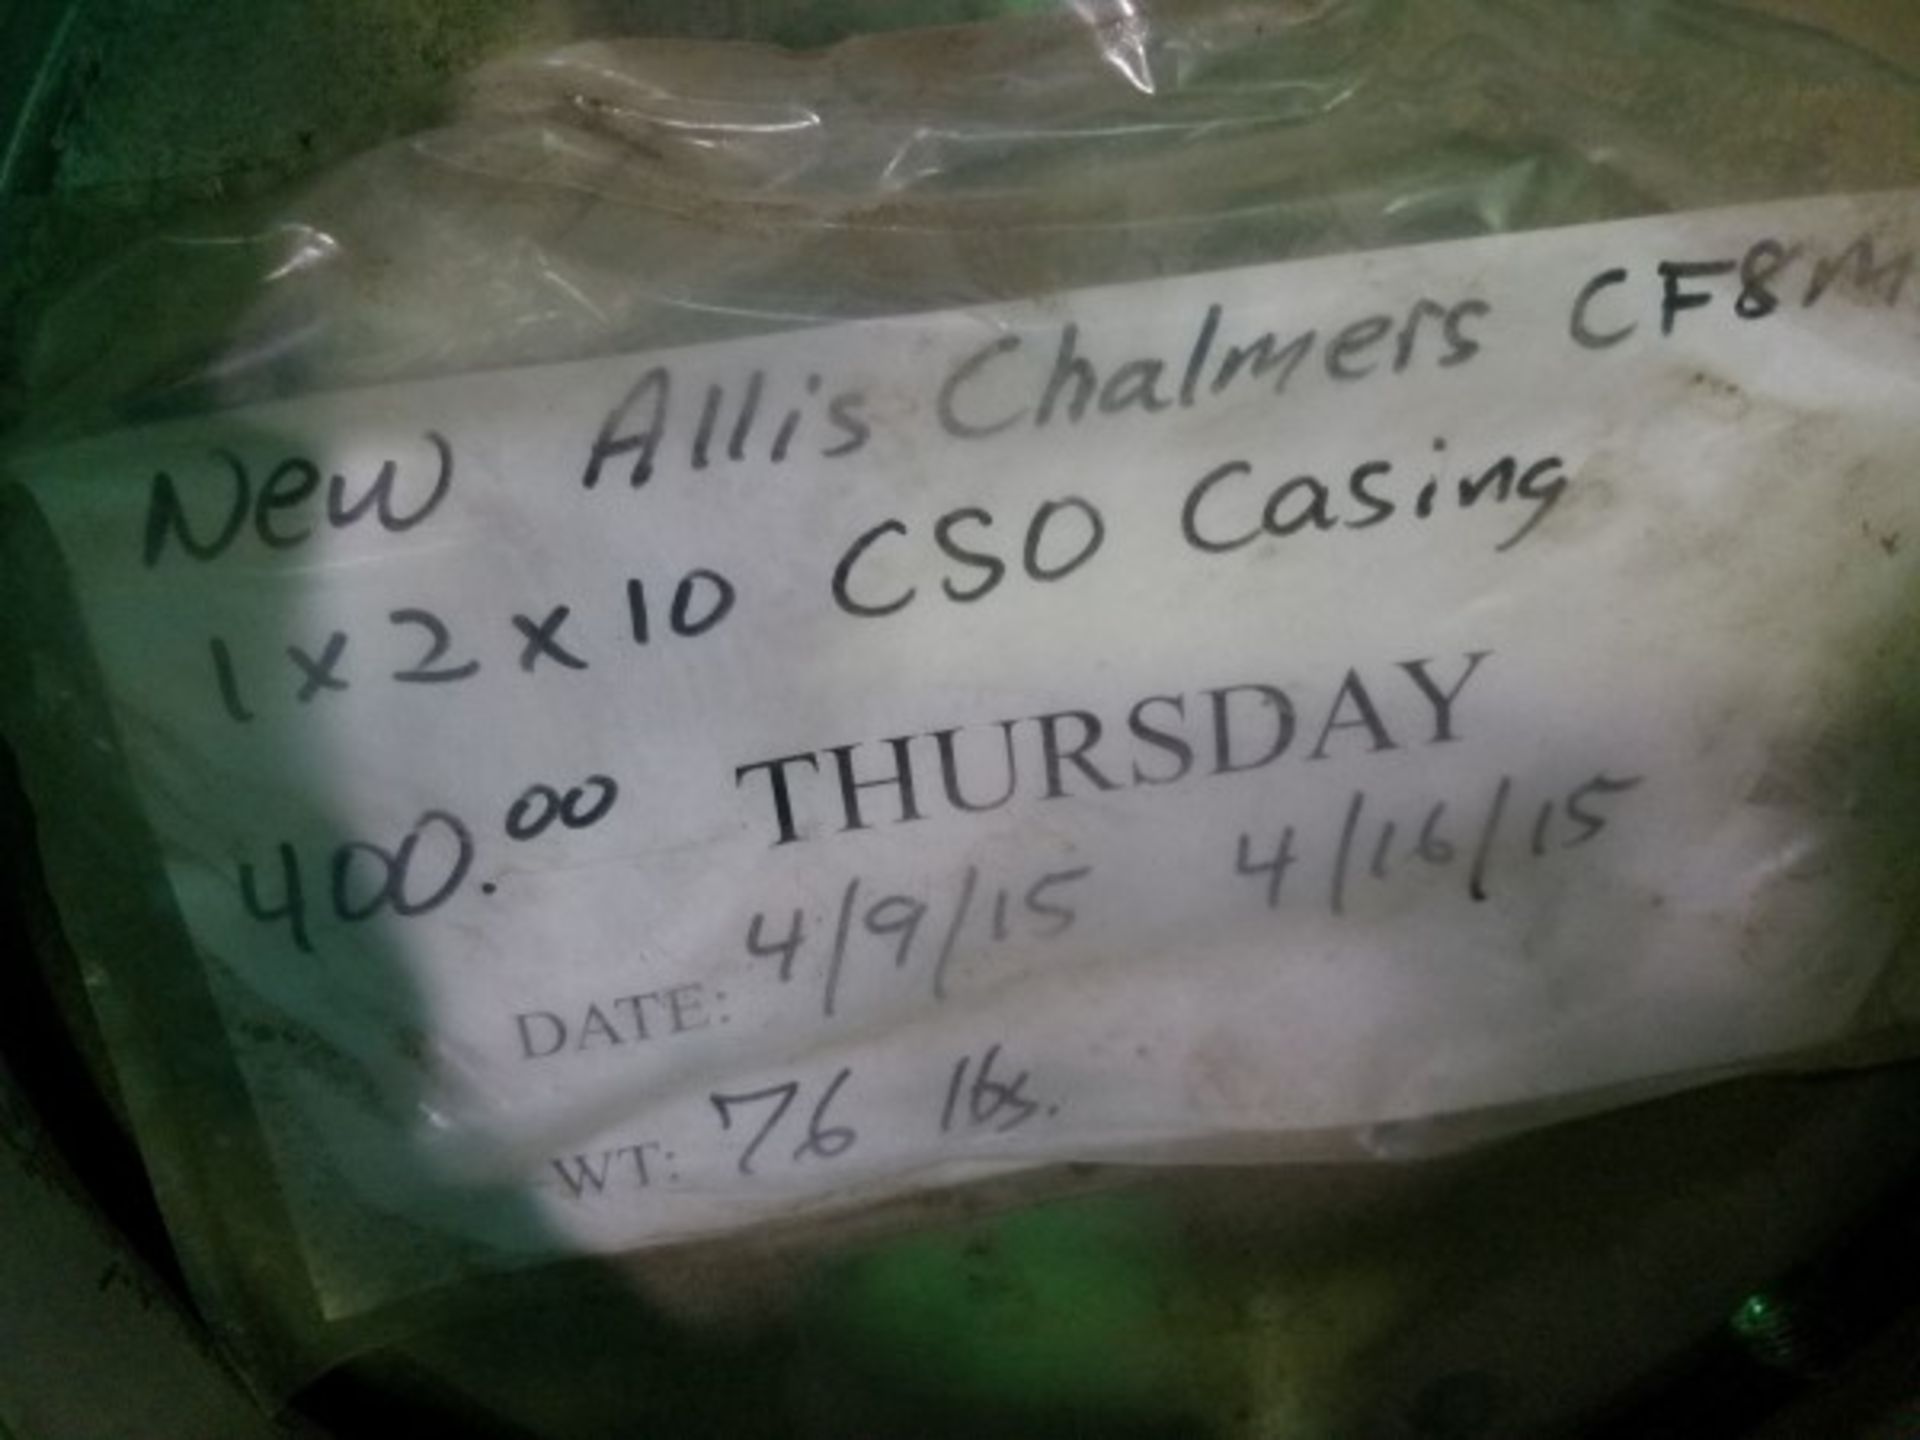 Allis Chalmers CF8M 1 x 2 x 10 CSO Casing | Seller to load for $10 per lot or buyers may remove hand - Image 2 of 2